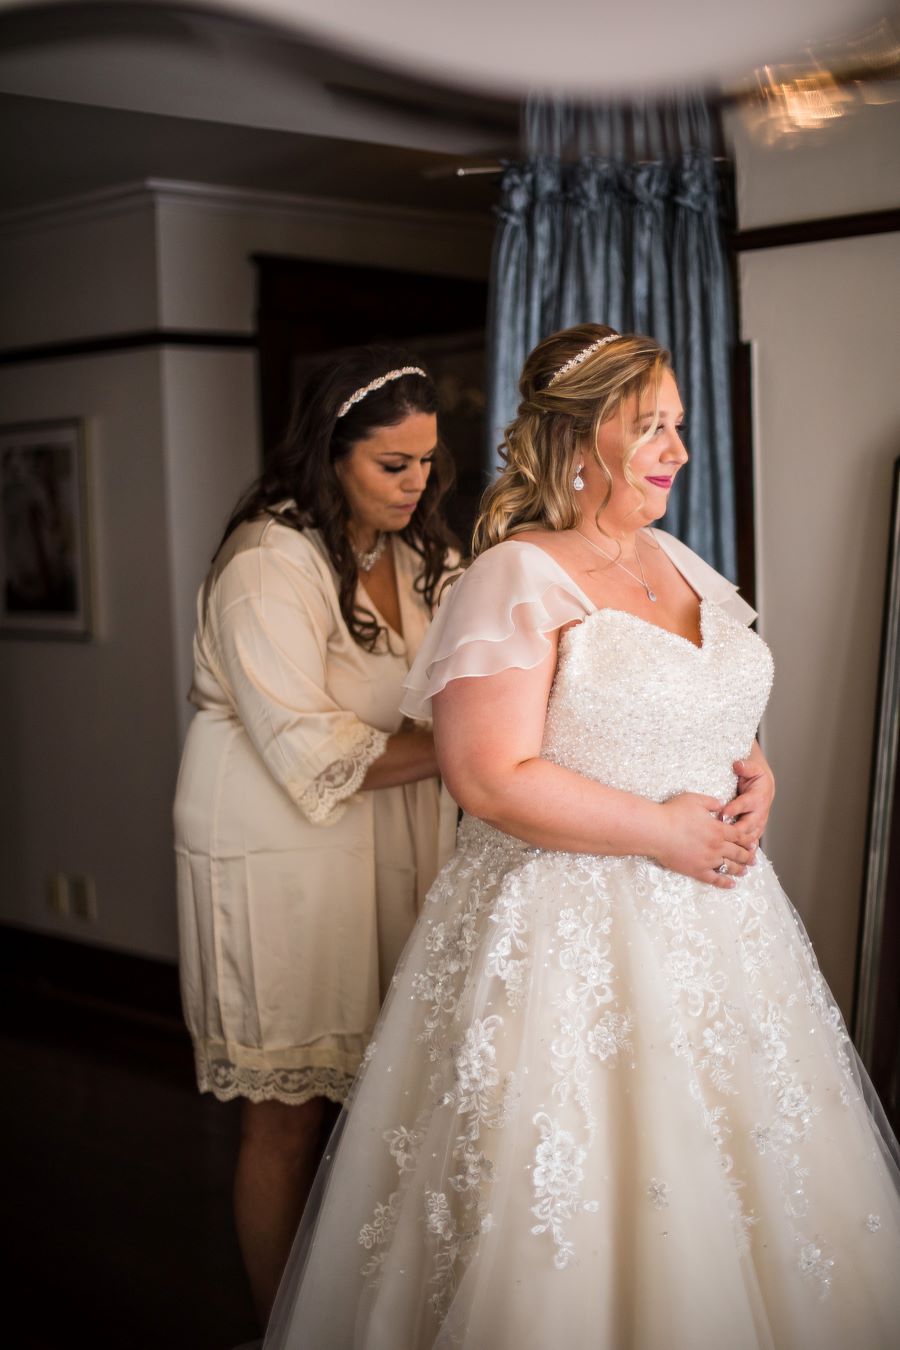 Bride being zipped into lace and beaded gown before lgbt wedding / Romantic / Summer / September / Pink / Dusty Rose / Cream